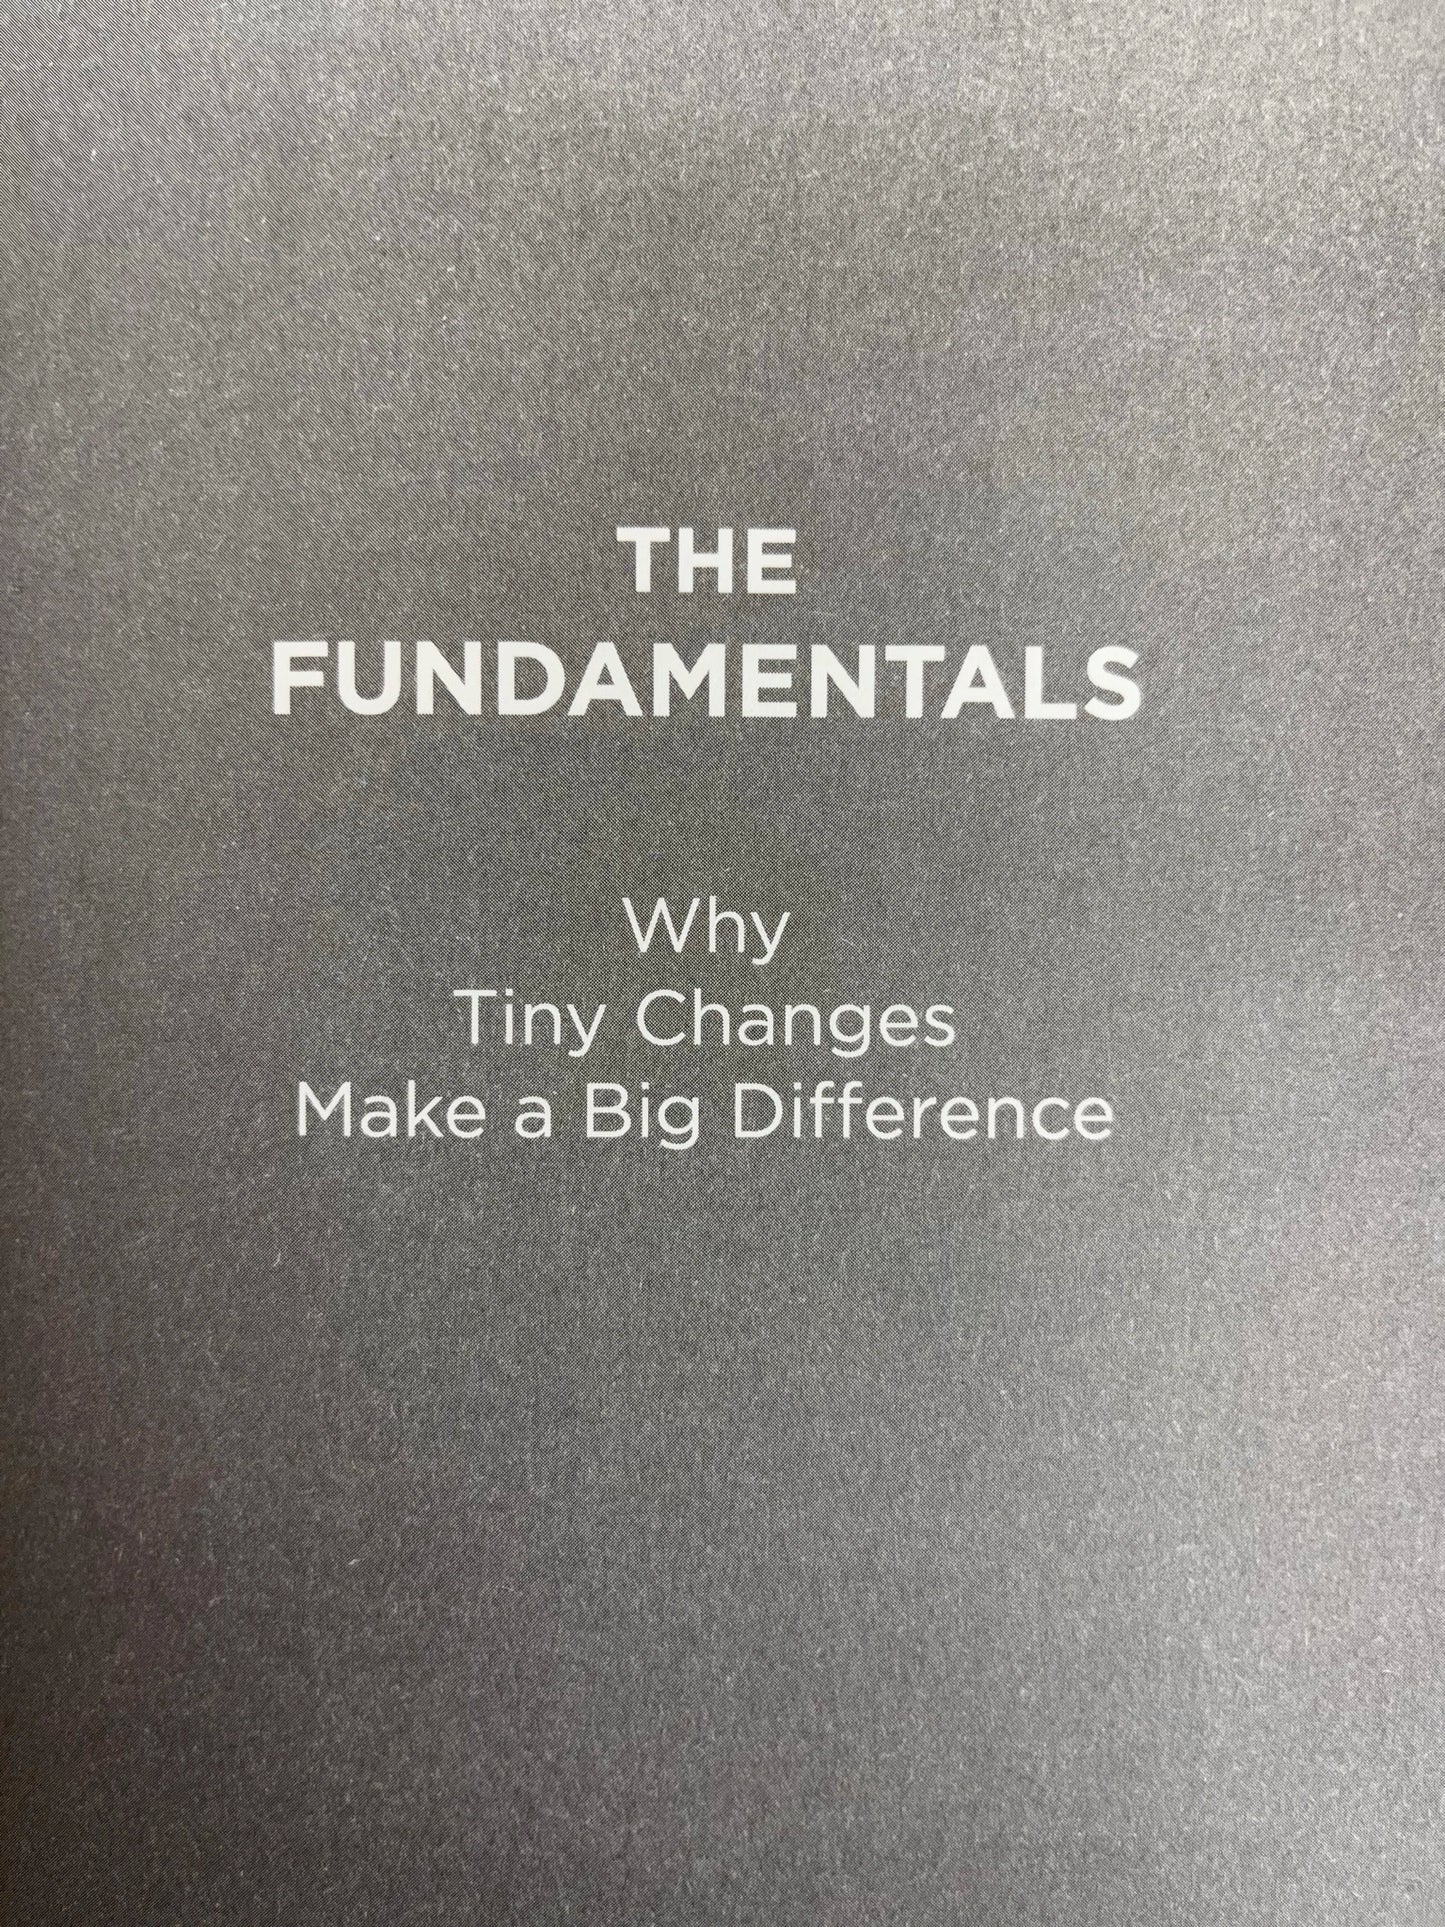 The Fundamentals of rules, Why Tiny Changes Make a Big Difference